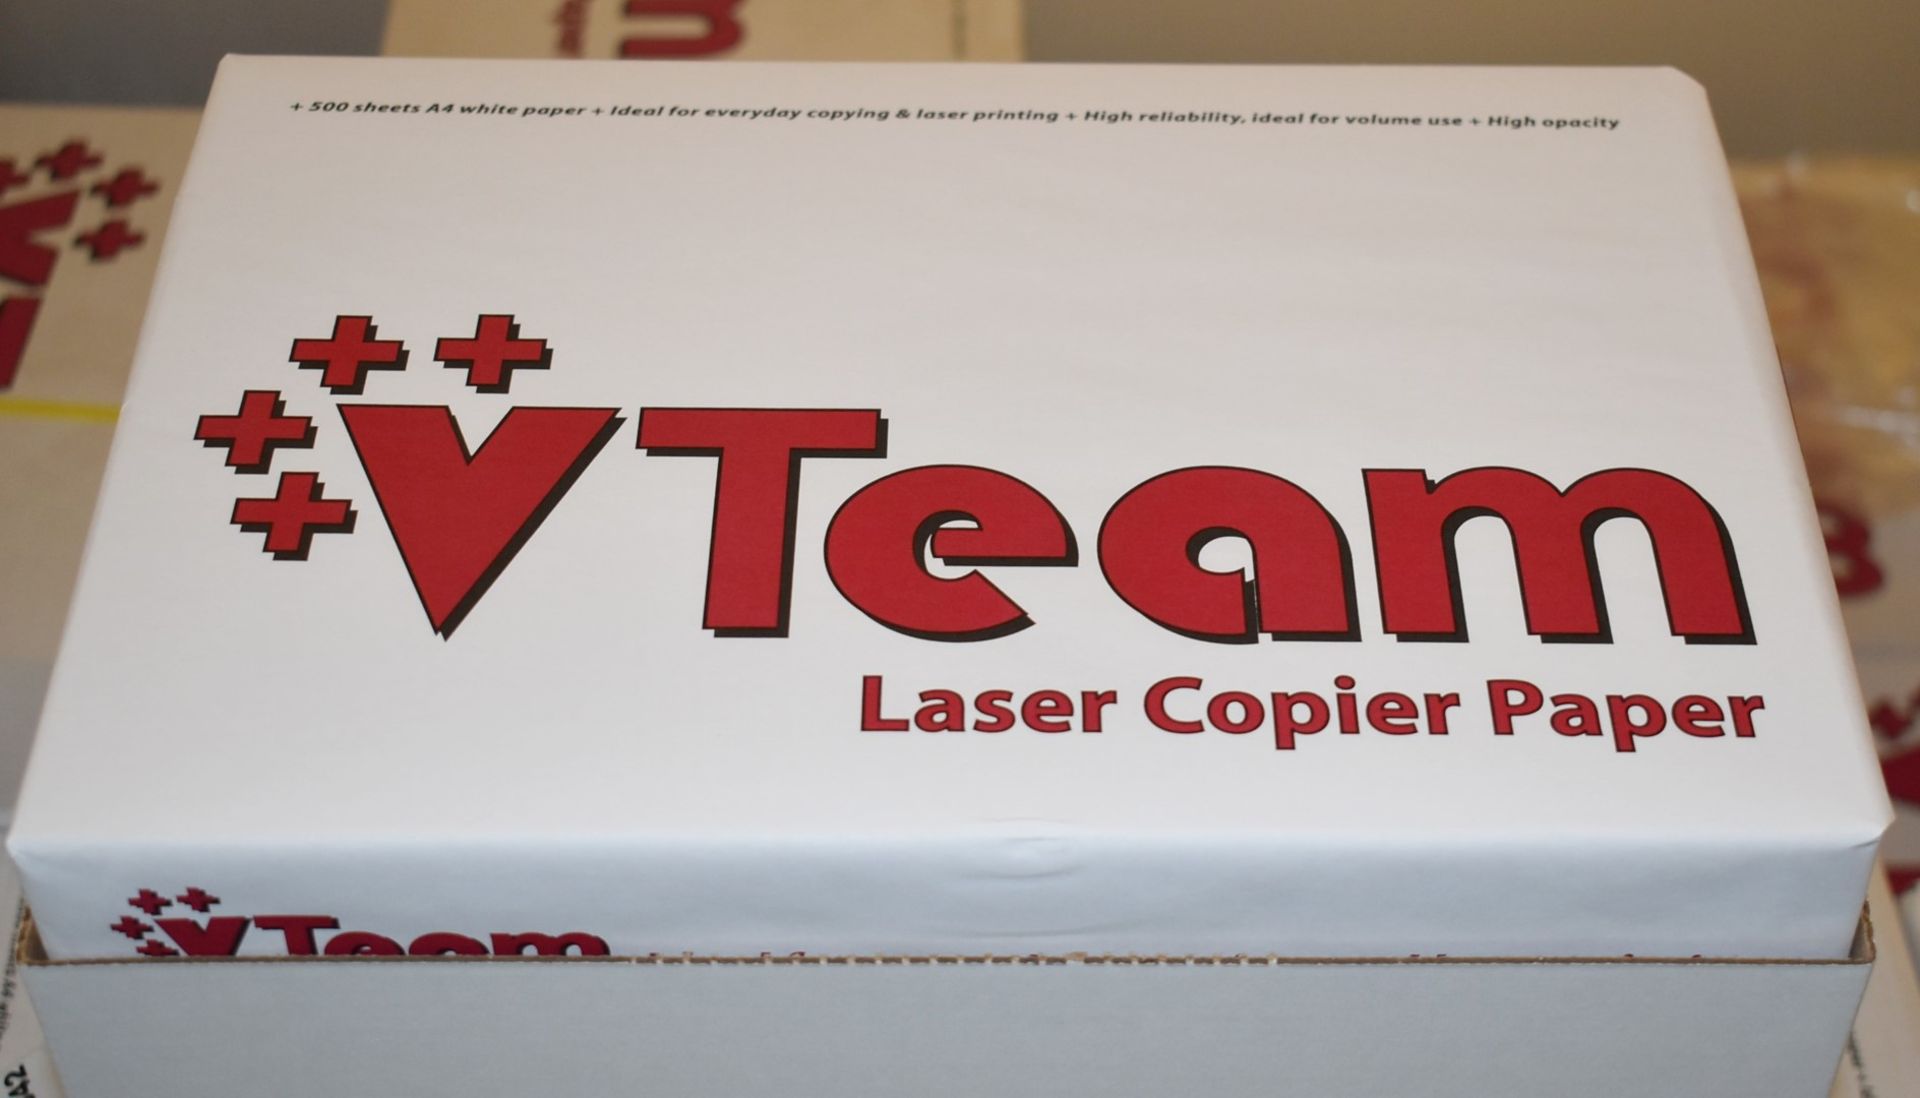 10 x Packs of Vteam A4 Laser Copy Paper - 500 Sheets Per Pack - Includes 2 x Boxes of 5 x Reams - - Image 2 of 6